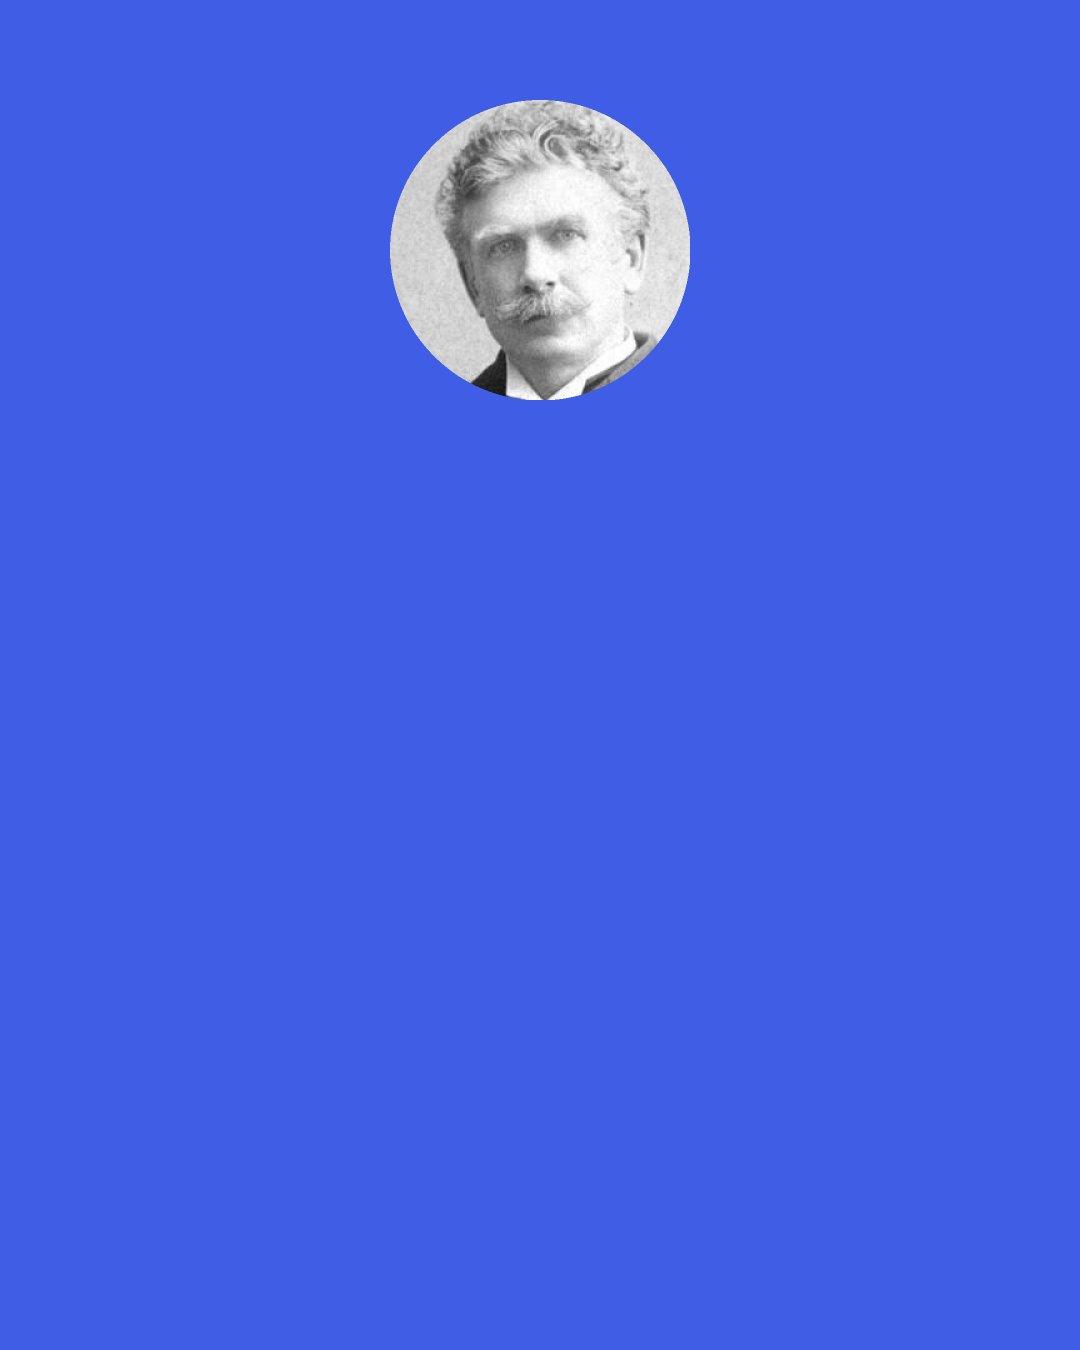 Ambrose Bierce: FORCE, n. "Force is but might," the teacher said p/ "That definition's just."/ The boy said naught but throught instead,/ Remembering his pounded head:/ "Force is not might but must!"